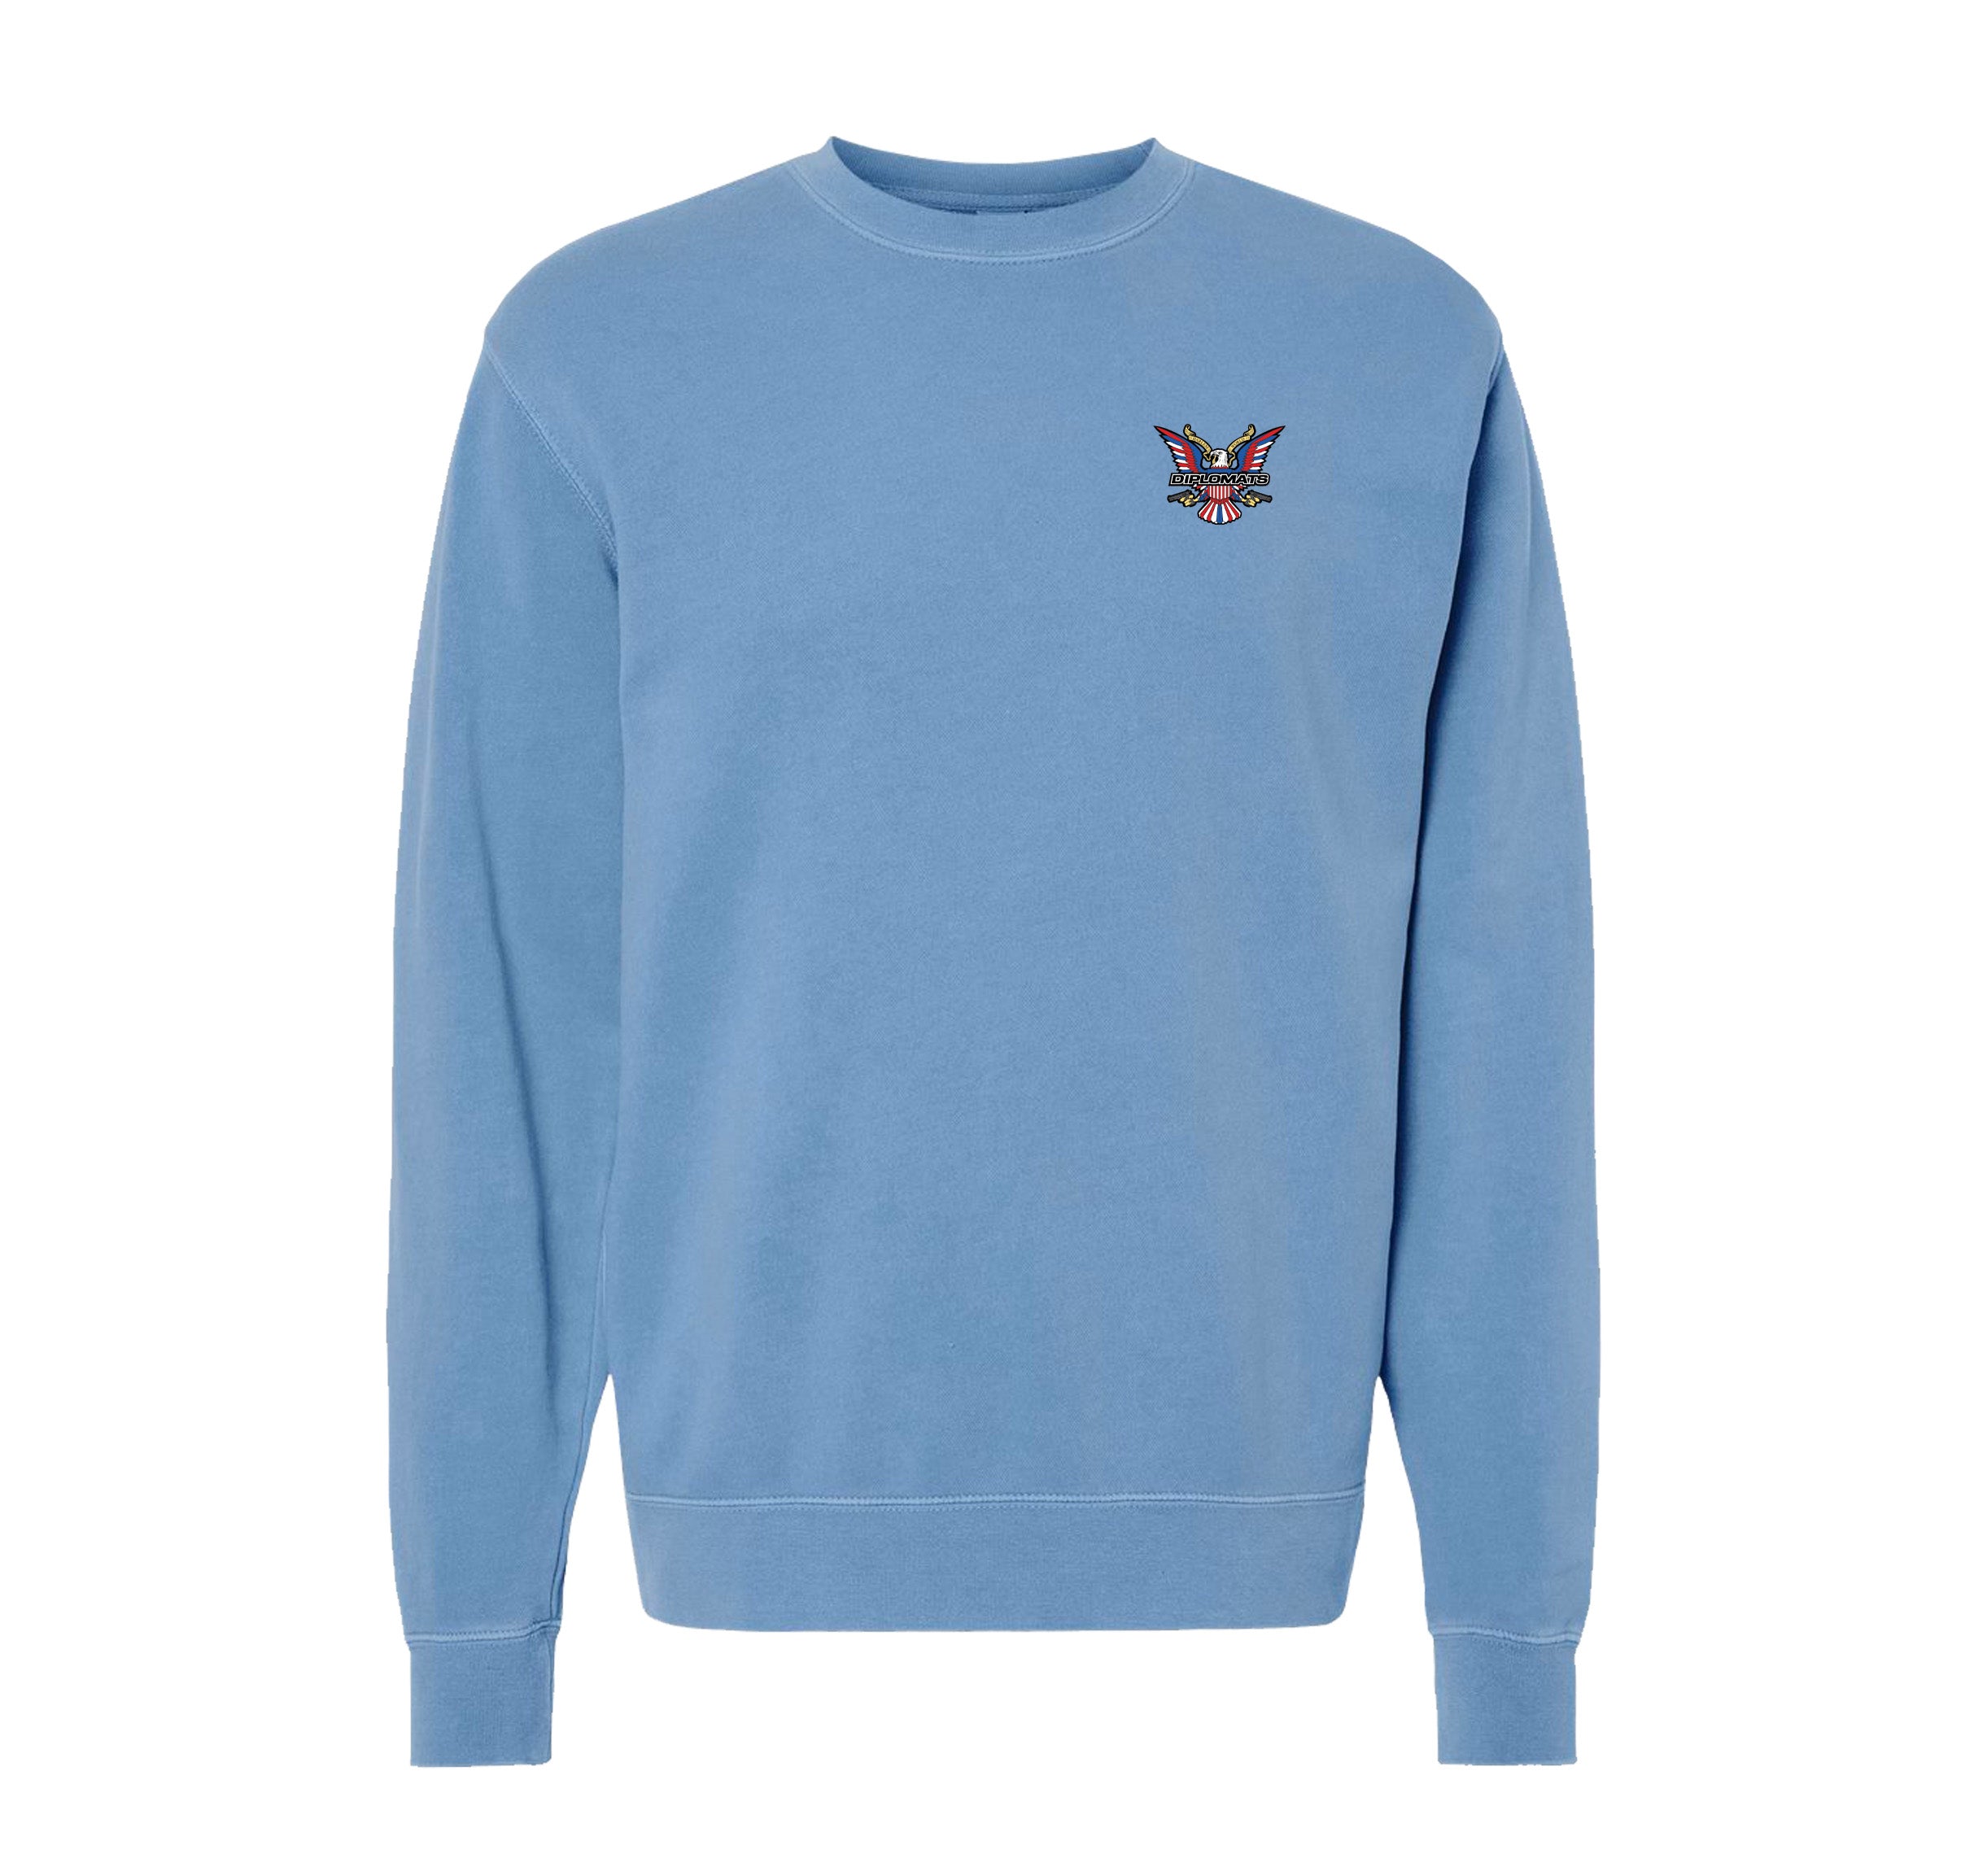 Vintage Washed Classic Crewneck Sweater